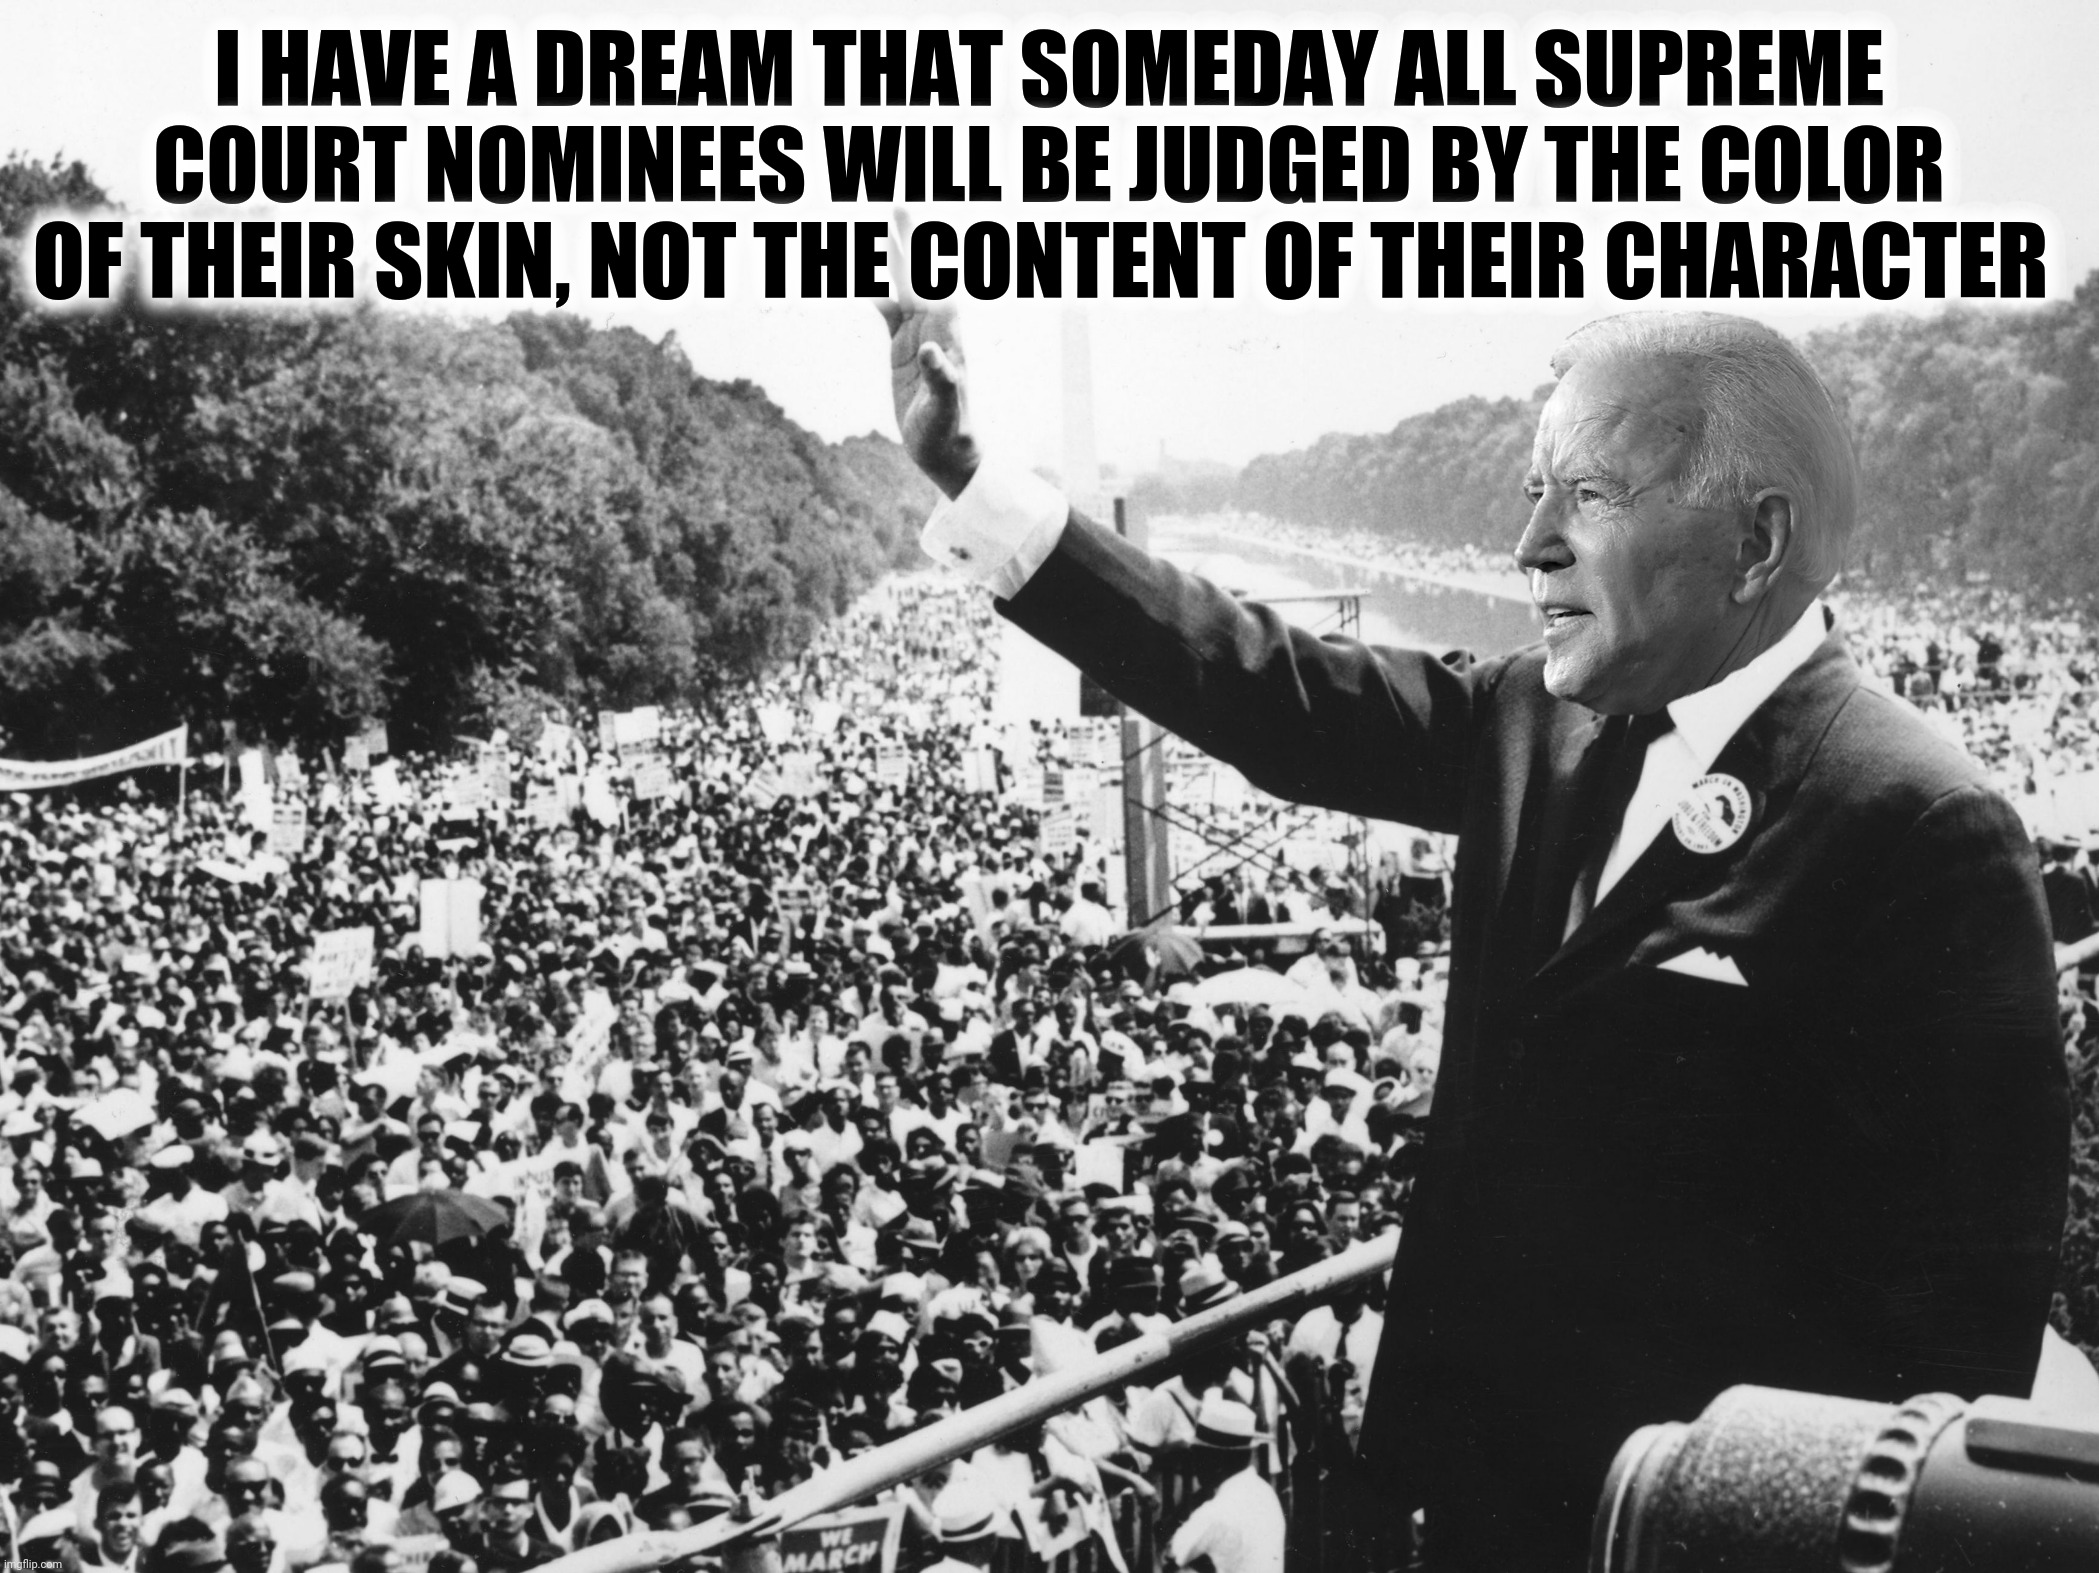 I have a nightmare!  (Submission suggested by AvgJoe) |  I HAVE A DREAM THAT SOMEDAY ALL SUPREME COURT NOMINEES WILL BE JUDGED BY THE COLOR OF THEIR SKIN, NOT THE CONTENT OF THEIR CHARACTER | image tagged in bad photoshop,martin luther king jr,joe biden,i have a dream | made w/ Imgflip meme maker